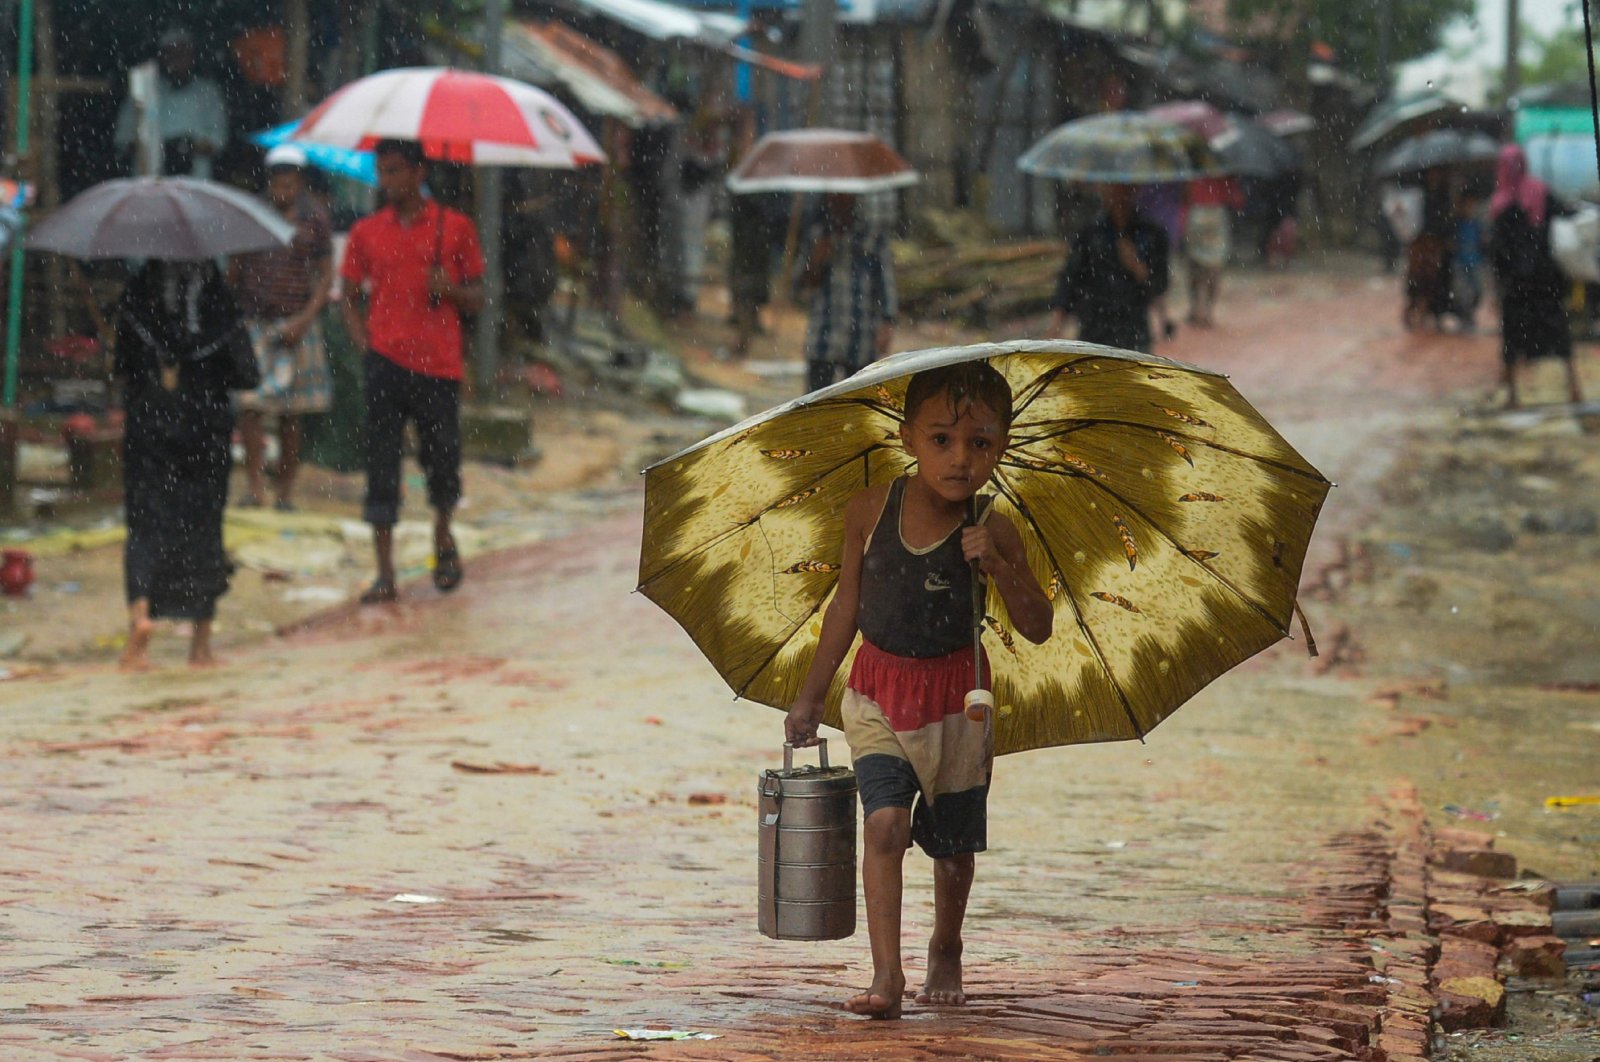 A Rohingya refugee boy shelters under an umbrella as he makes his way during a monsoon rainfall at Kutupalong refugee camp in Ukhia on Sept. 12, 2019. (AFP Photo)